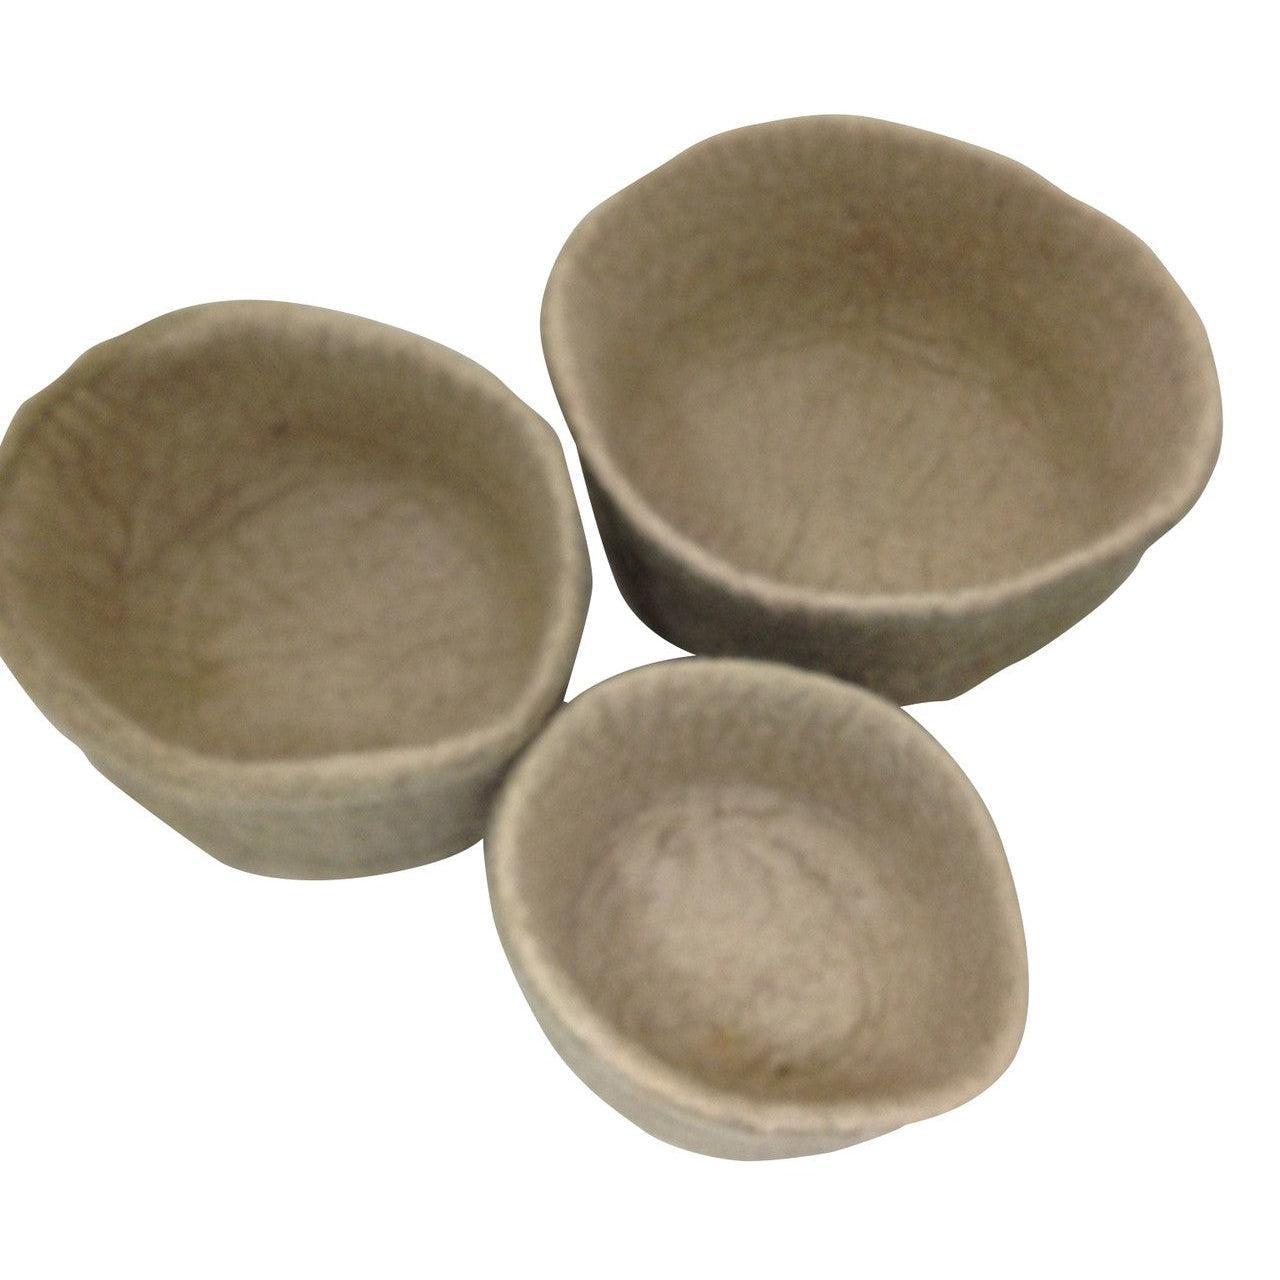 Papoose Nesting Bowls - Natural - 3 Pieces